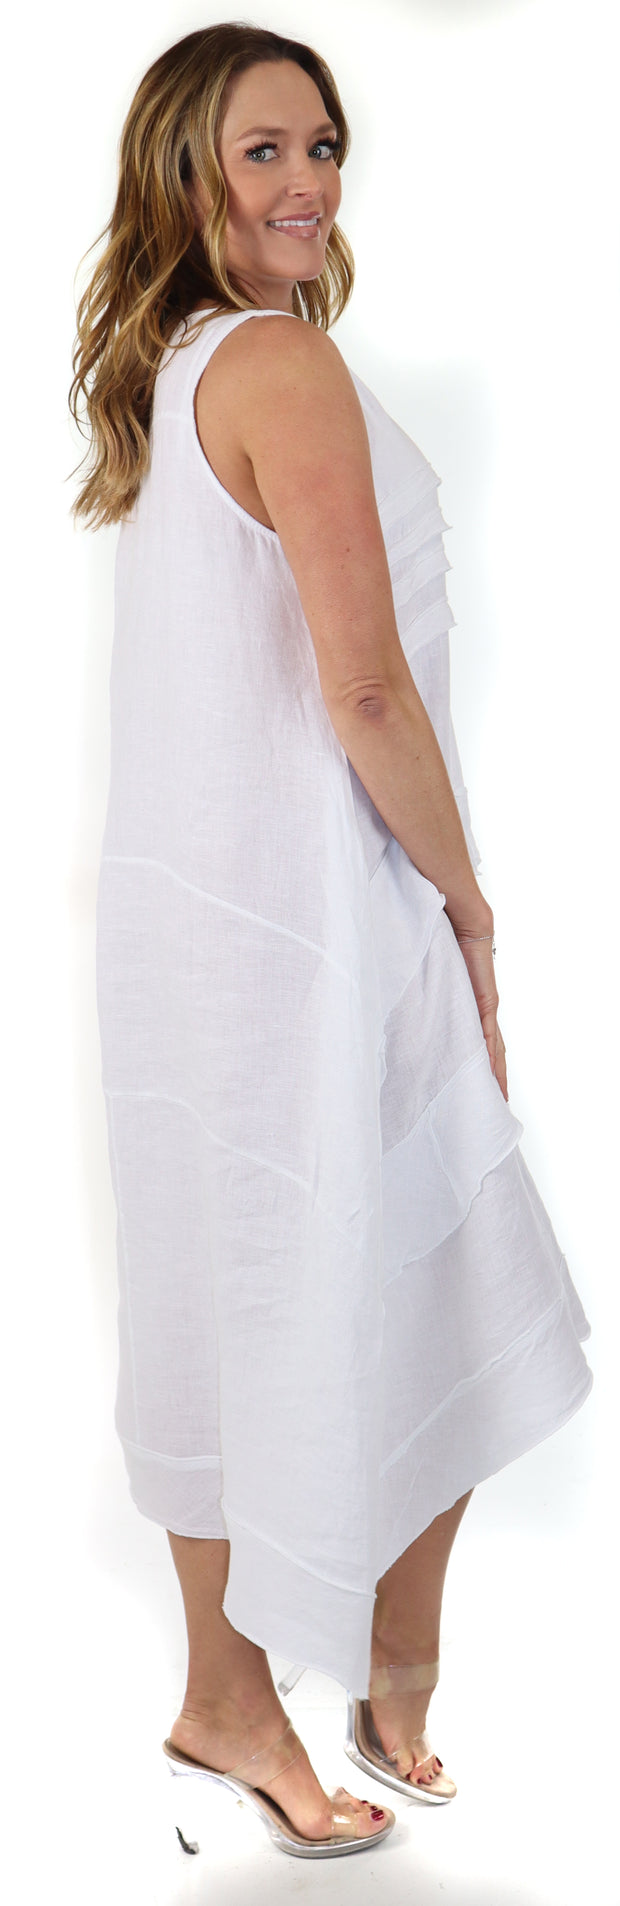 Women's Asymmetrical Hi Low Maxi Dress, 7 Ruffle Trim, 100% Natural Linen and Made in Italy, Regular and Plus Sizes